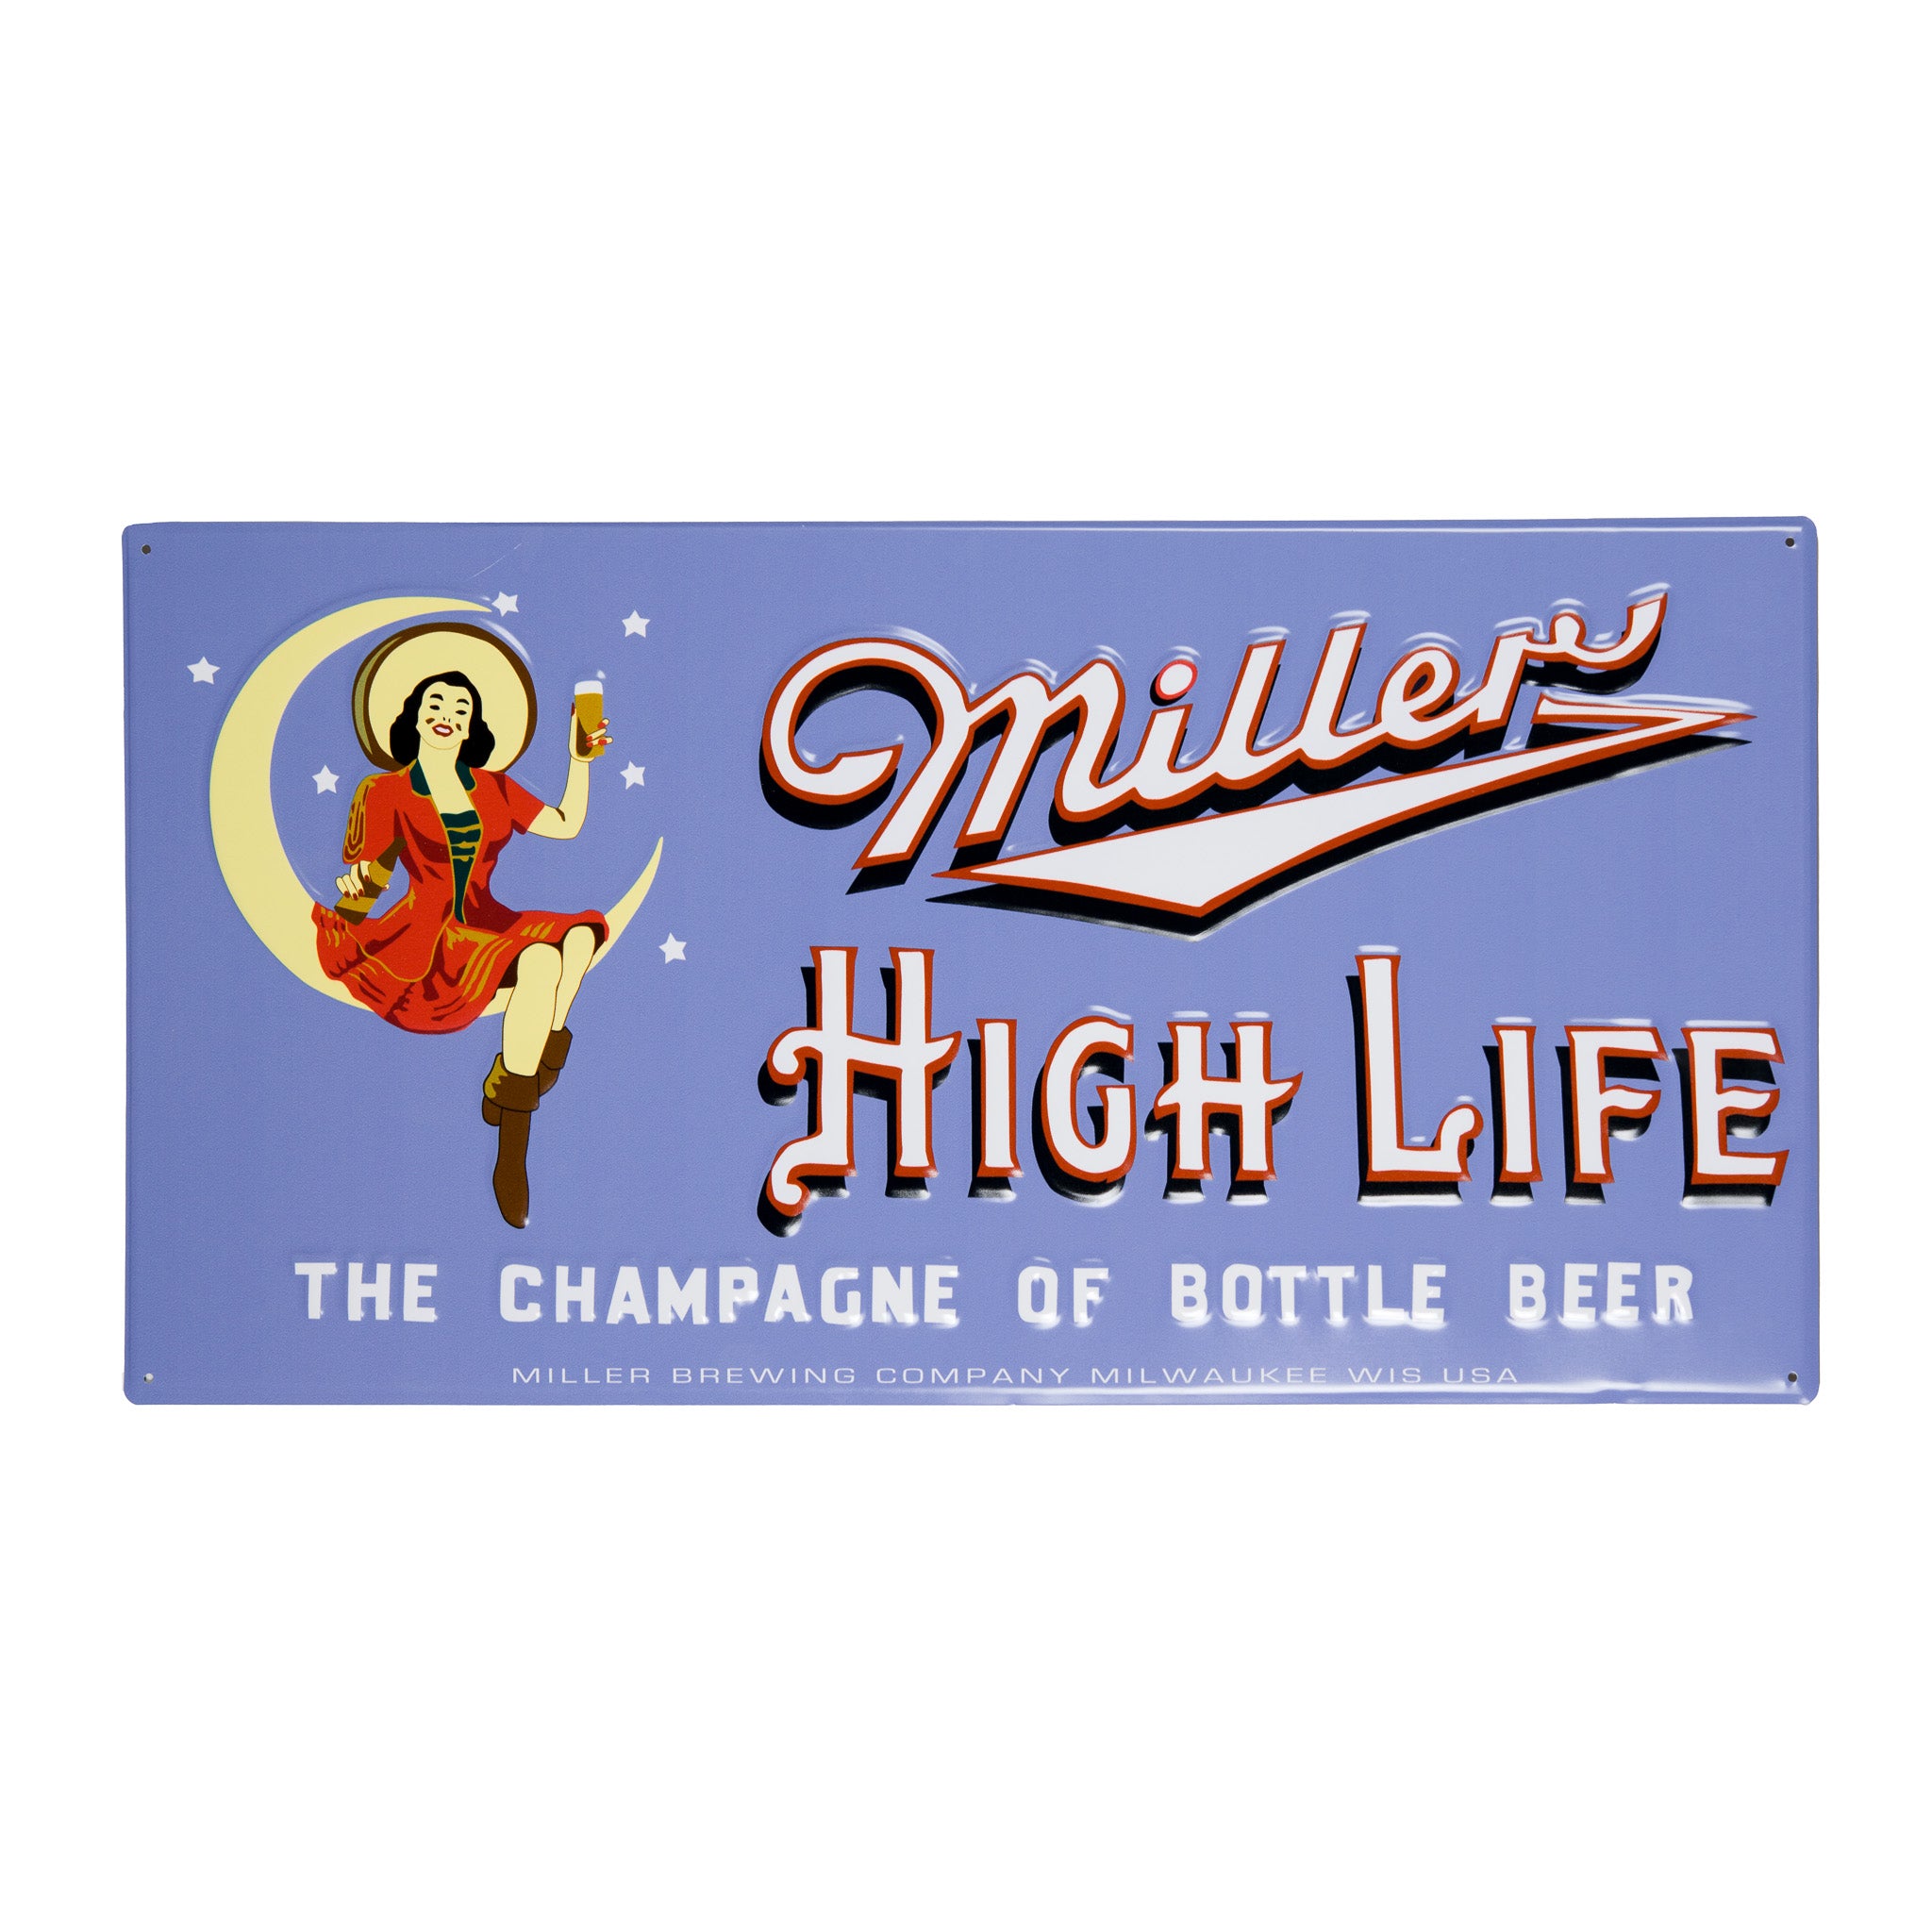 HIGH LIFE CHAMPAGNE OF BEERS METAL SIGN